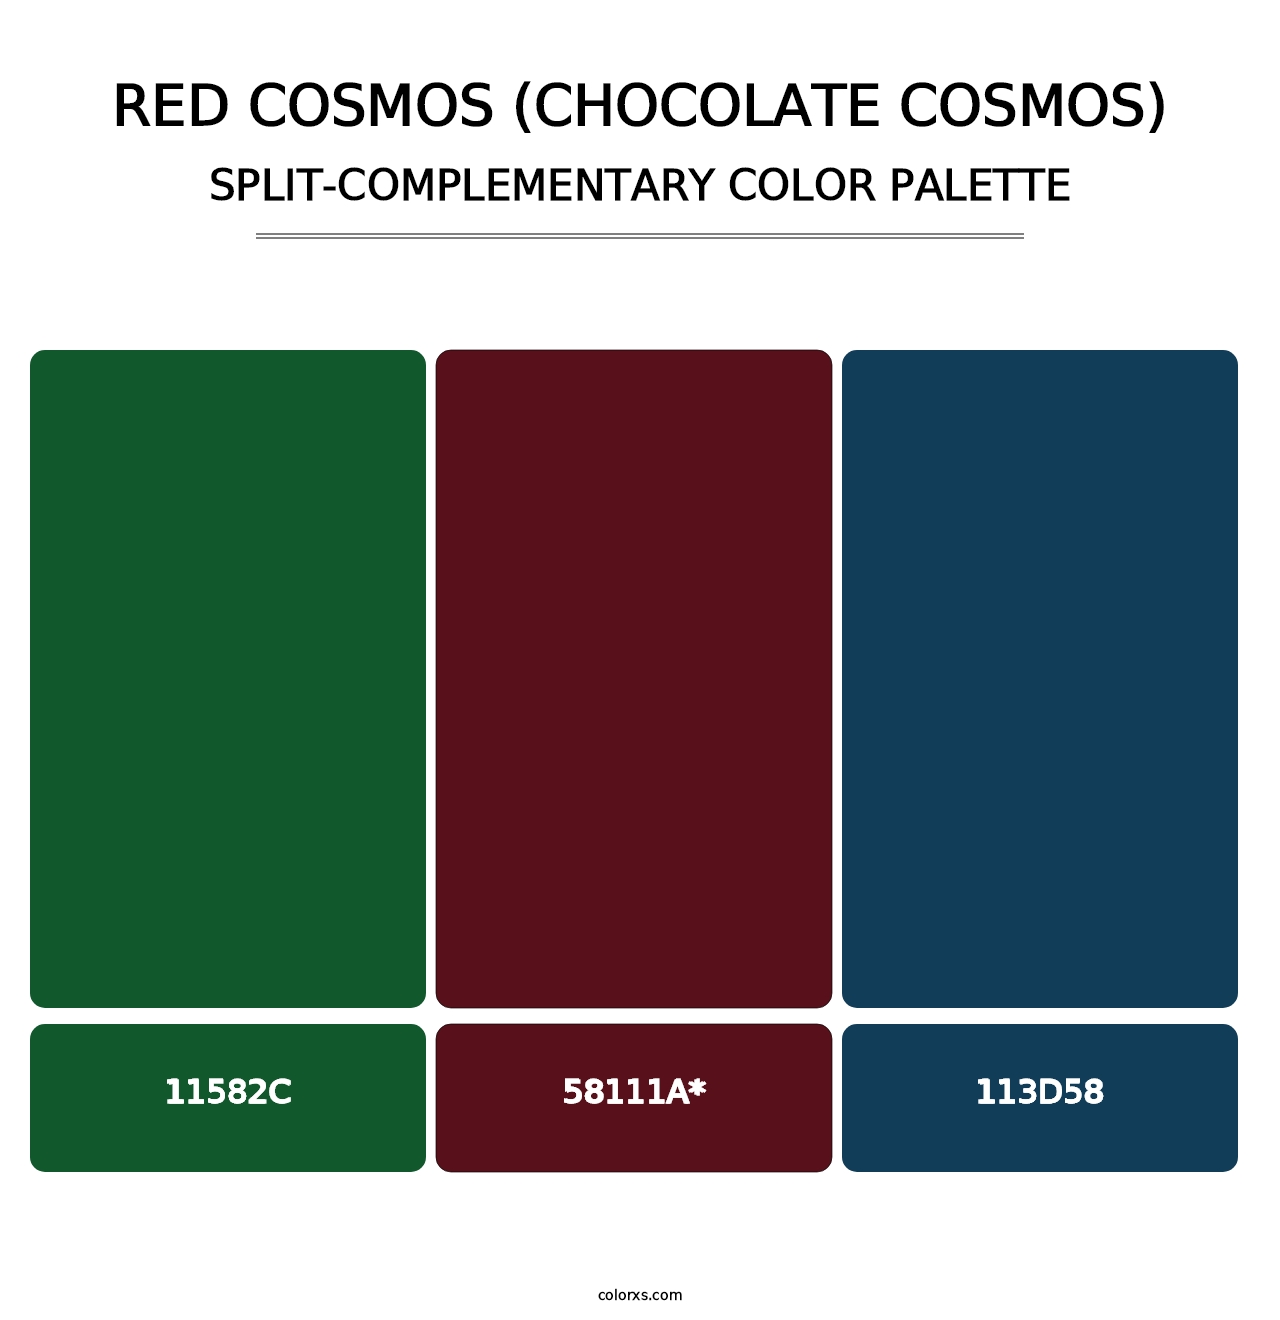 Red Cosmos (Chocolate Cosmos) - Split-Complementary Color Palette